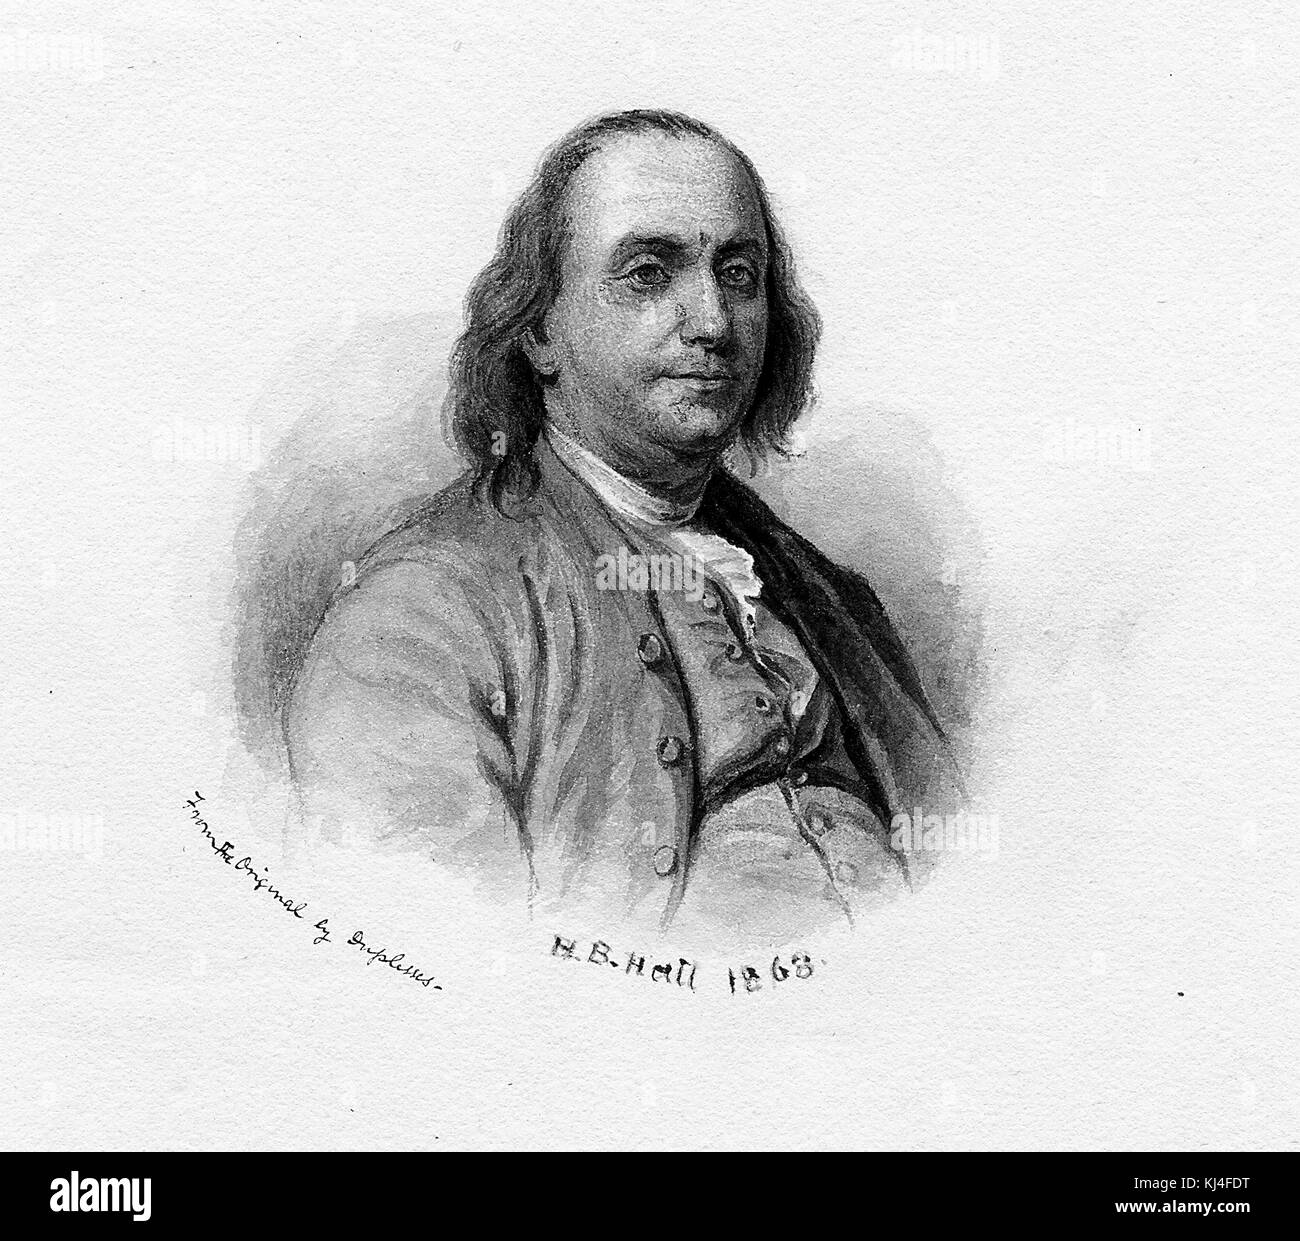 Engraved portrait of a younger Benjamin Franklin by HB Hall, 1868. From the New York Public Library. Stock Photo